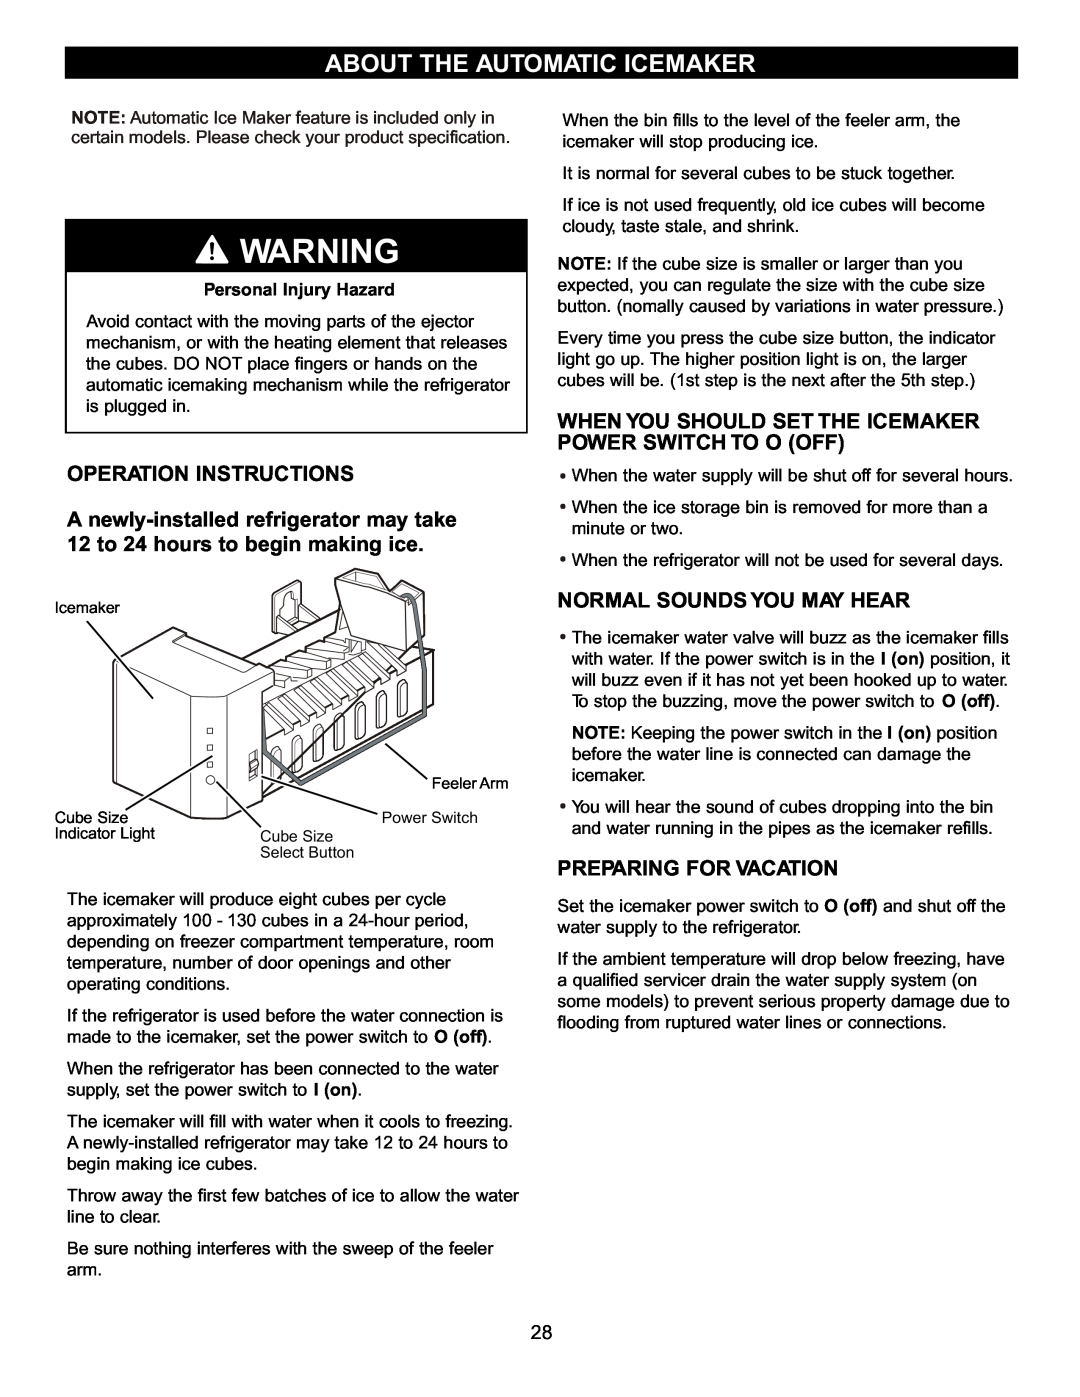 LG Electronics LFC22740, LFC20740 About The Automatic Icemaker, Operation Instructions, Normal Sounds You May Hear 